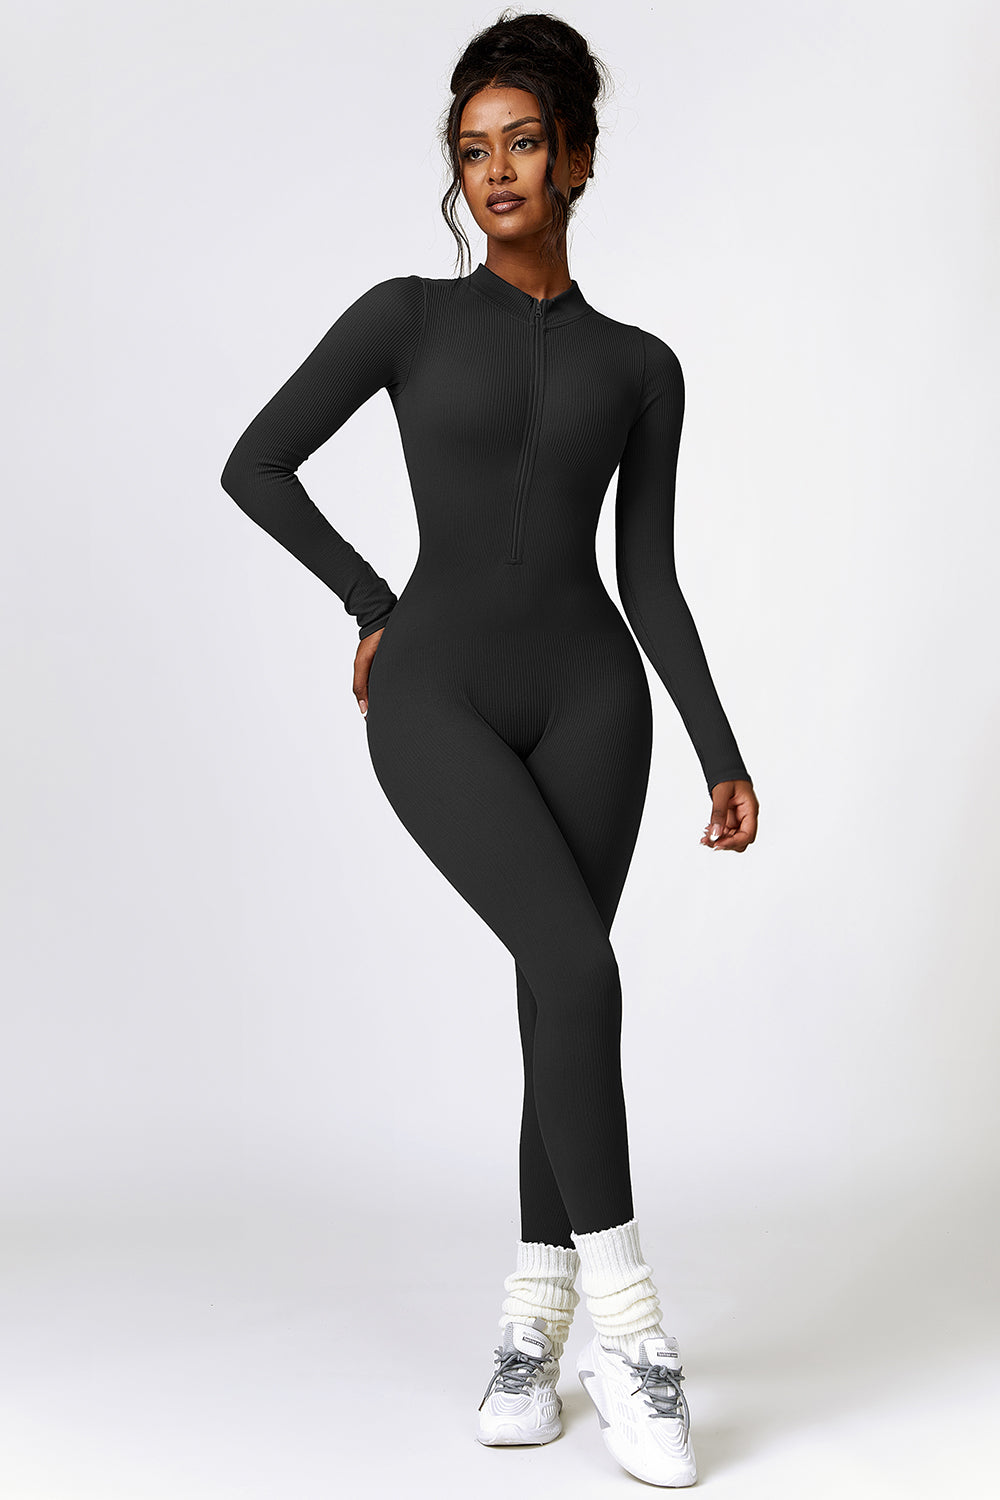 a woman in a black bodysuit posing for a picture